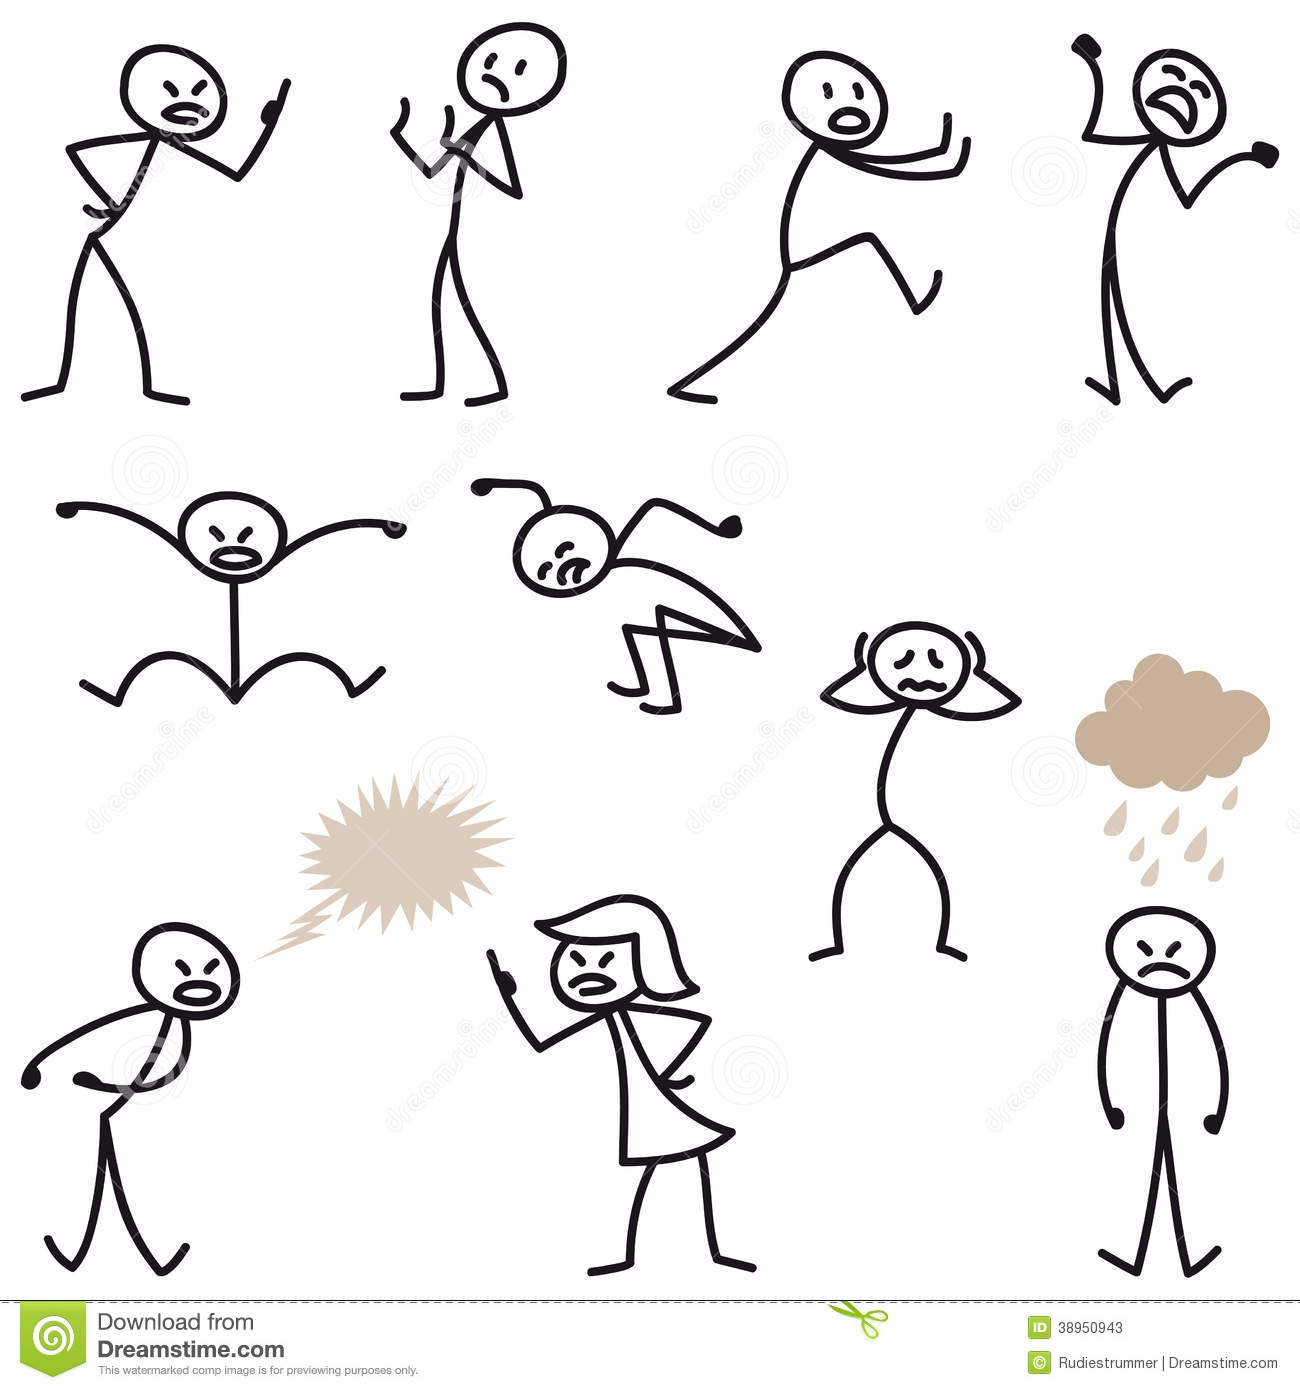 Angry Stick Figure Clip Art